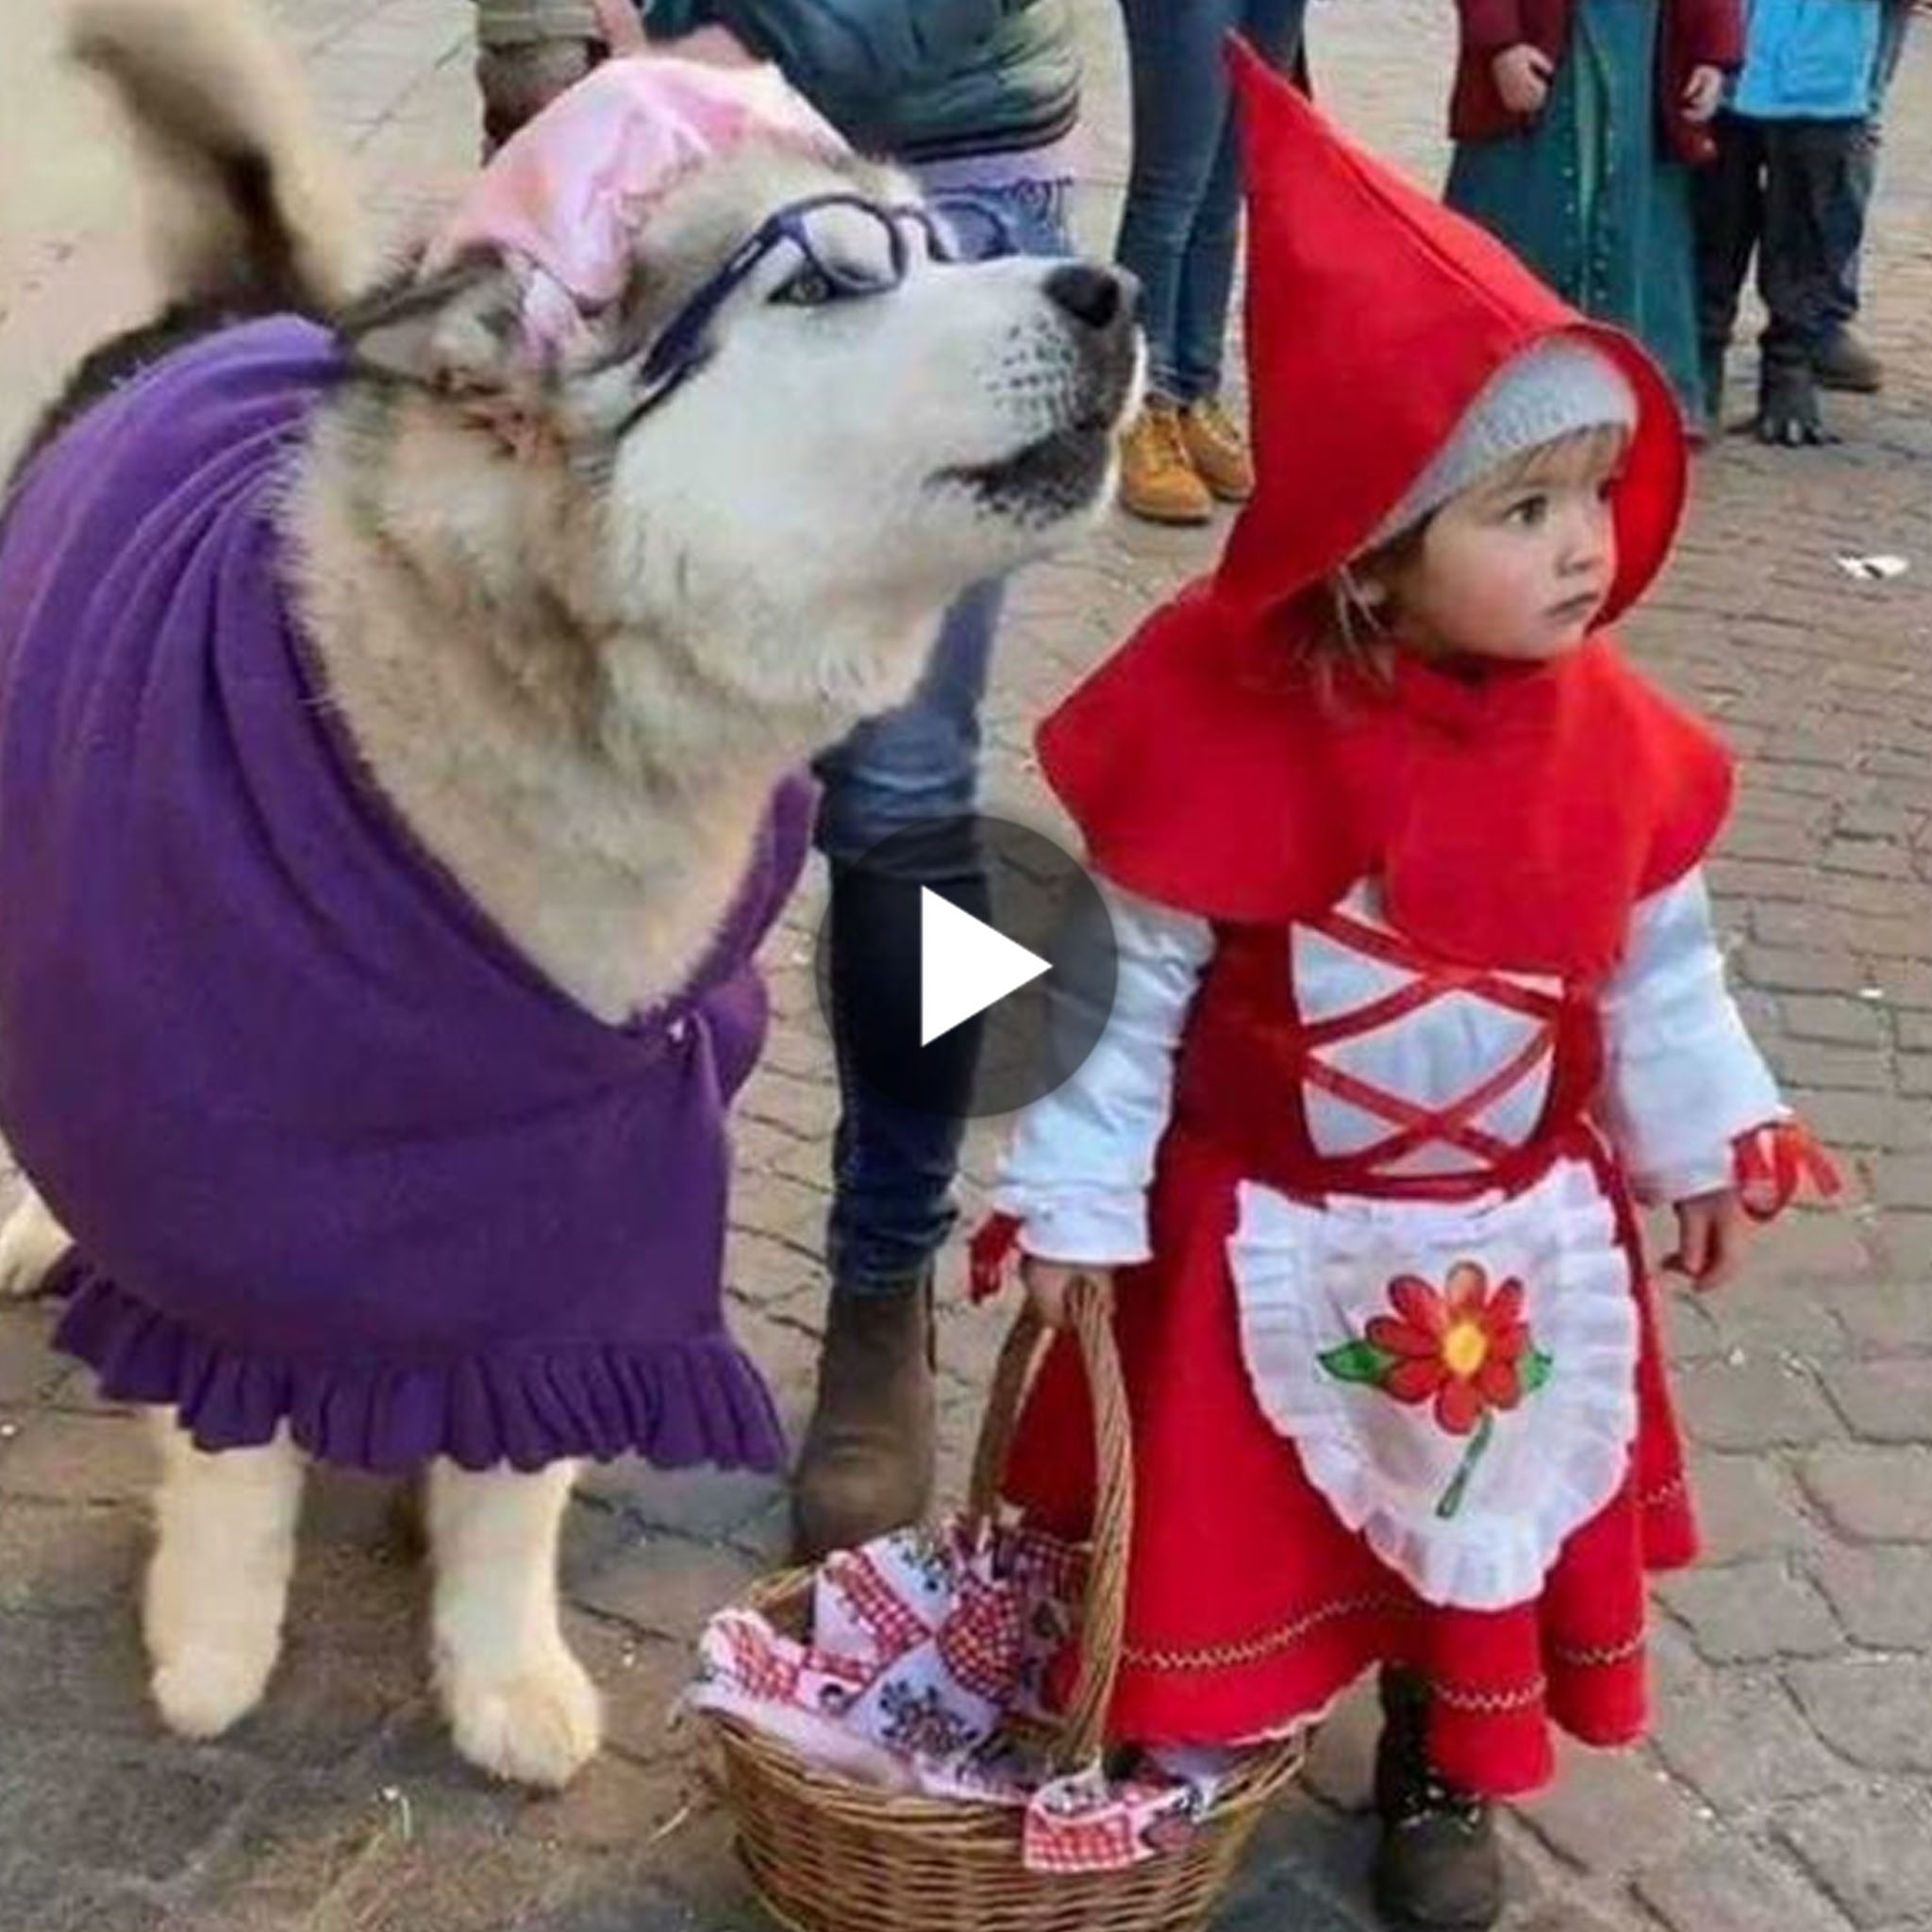 tho “Delighted with the too-cute Little Red Riding Hood and the big and adorable ‘bad wolf’ Husky. It made netizens see the cuteness of both of them.” tho